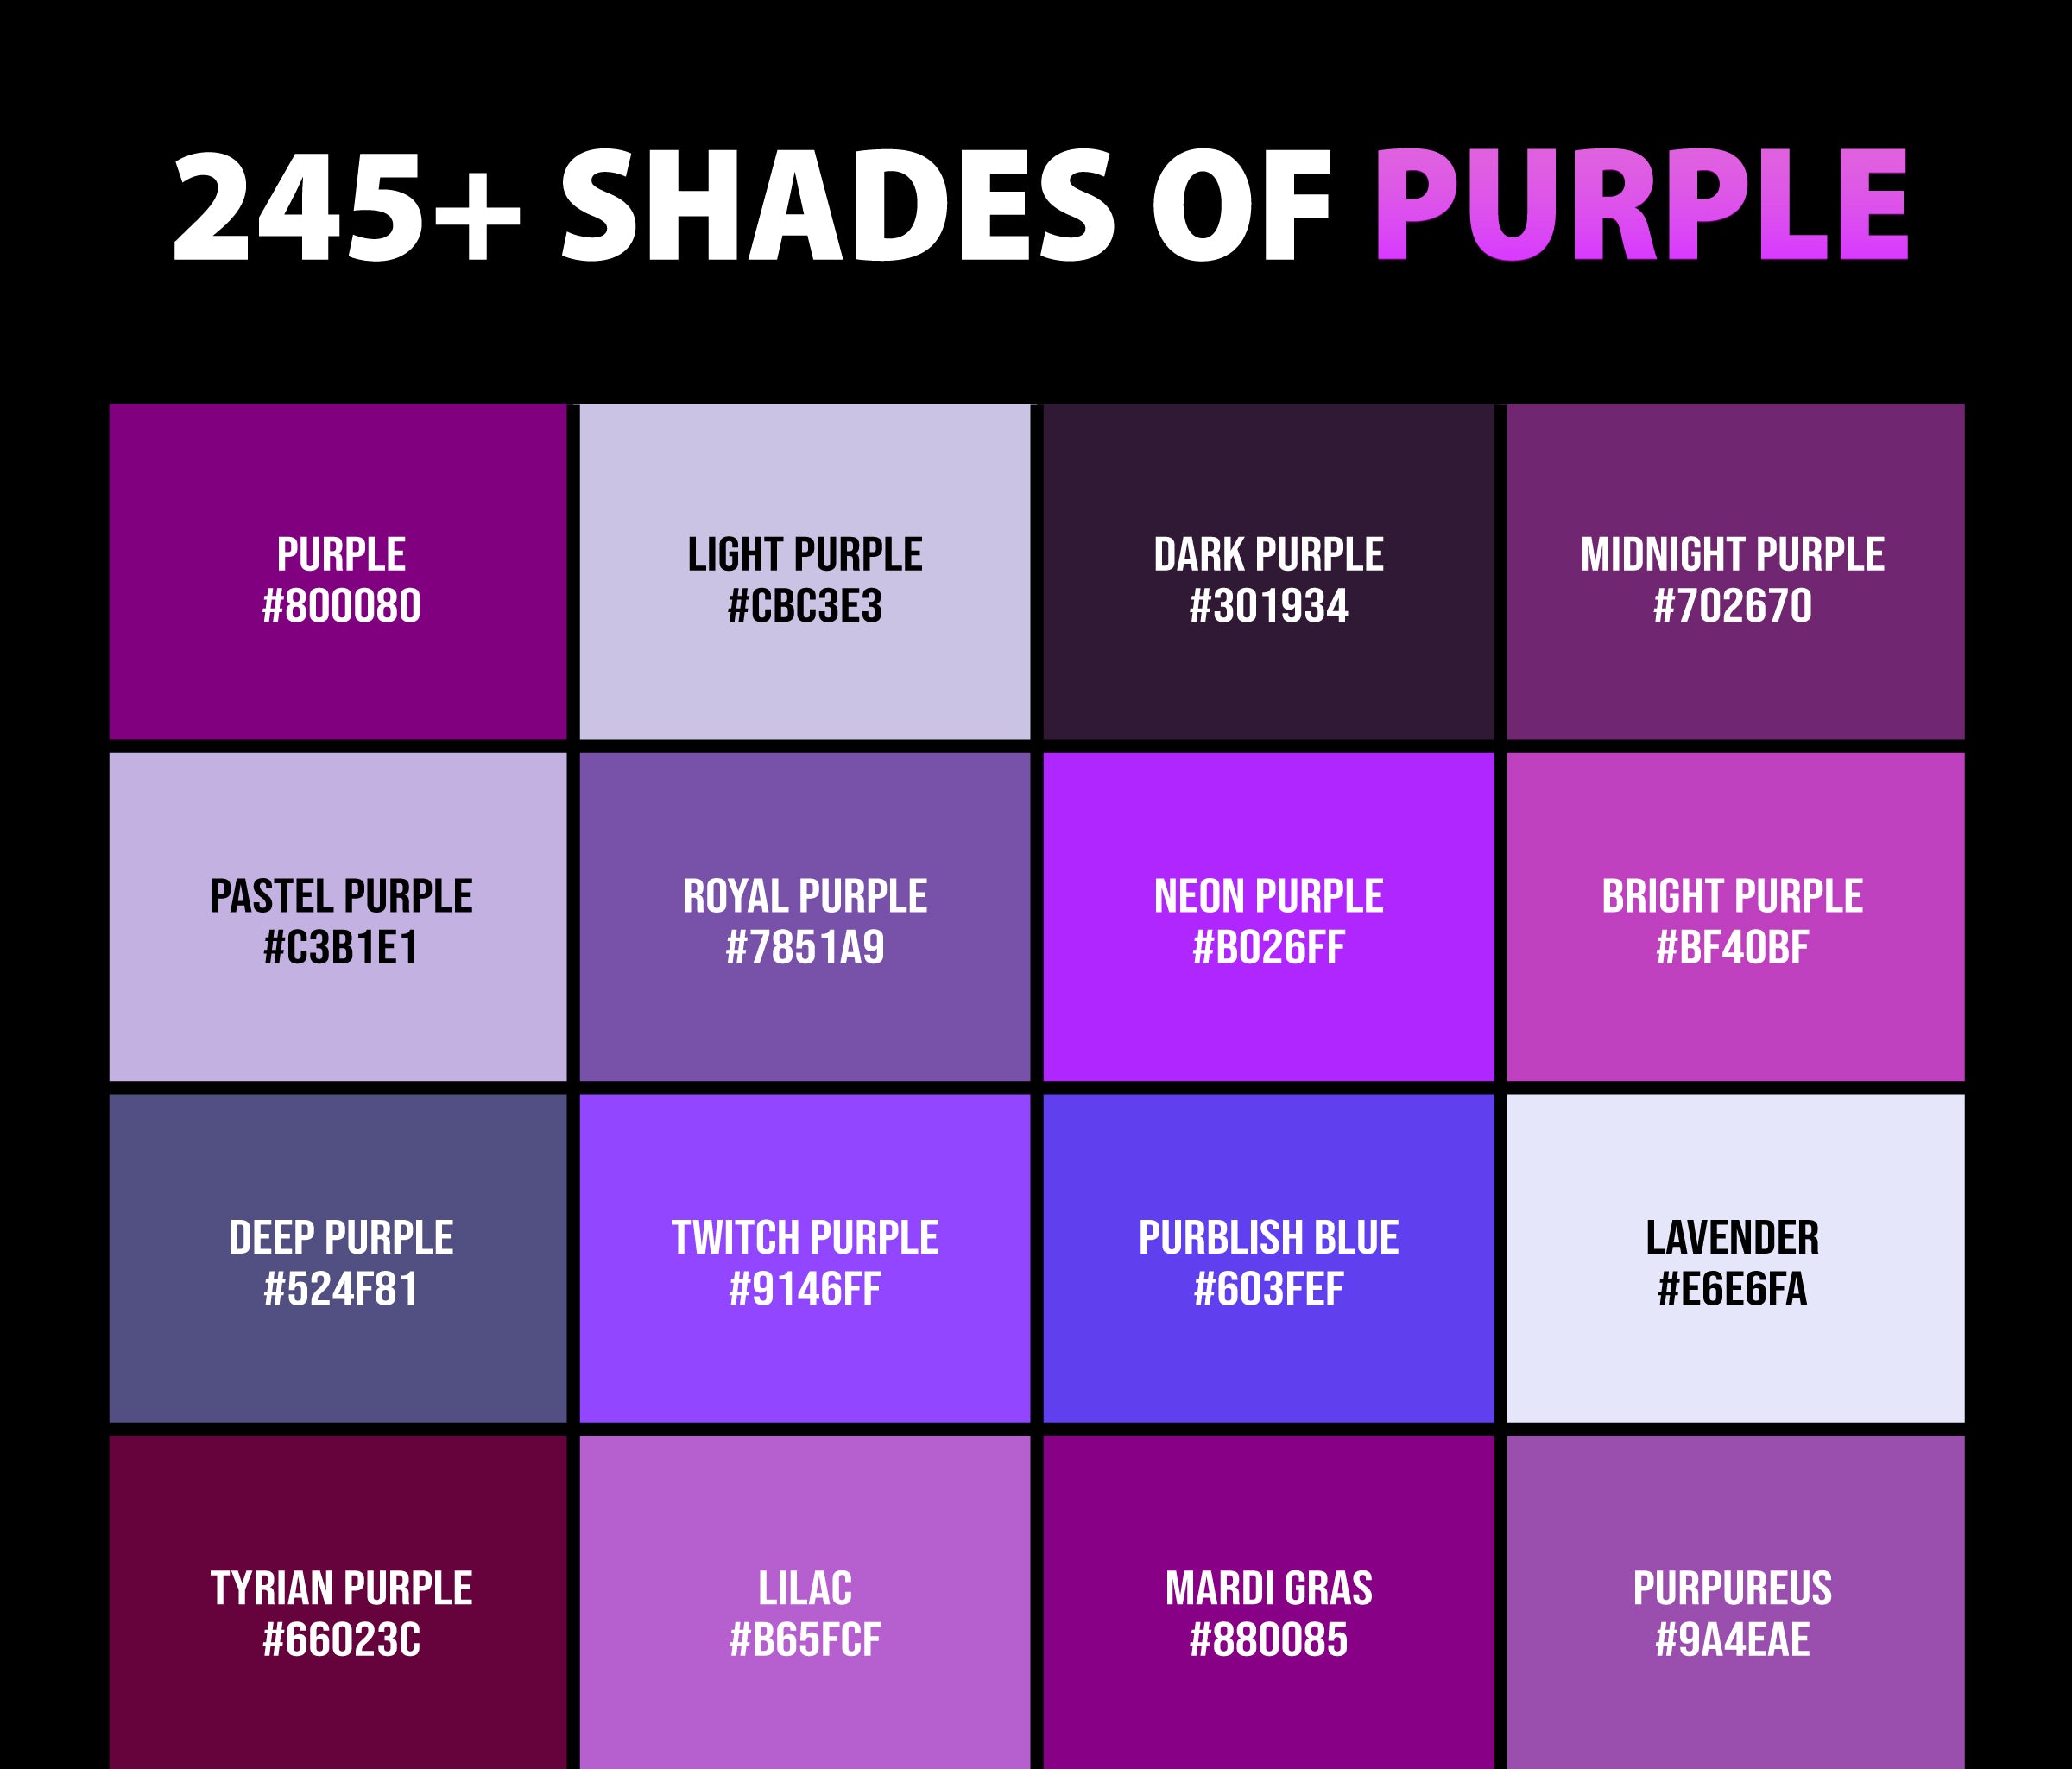 Shades-of-Purple-Color-Chart-with-Namex-and-Hex-Color-Codes